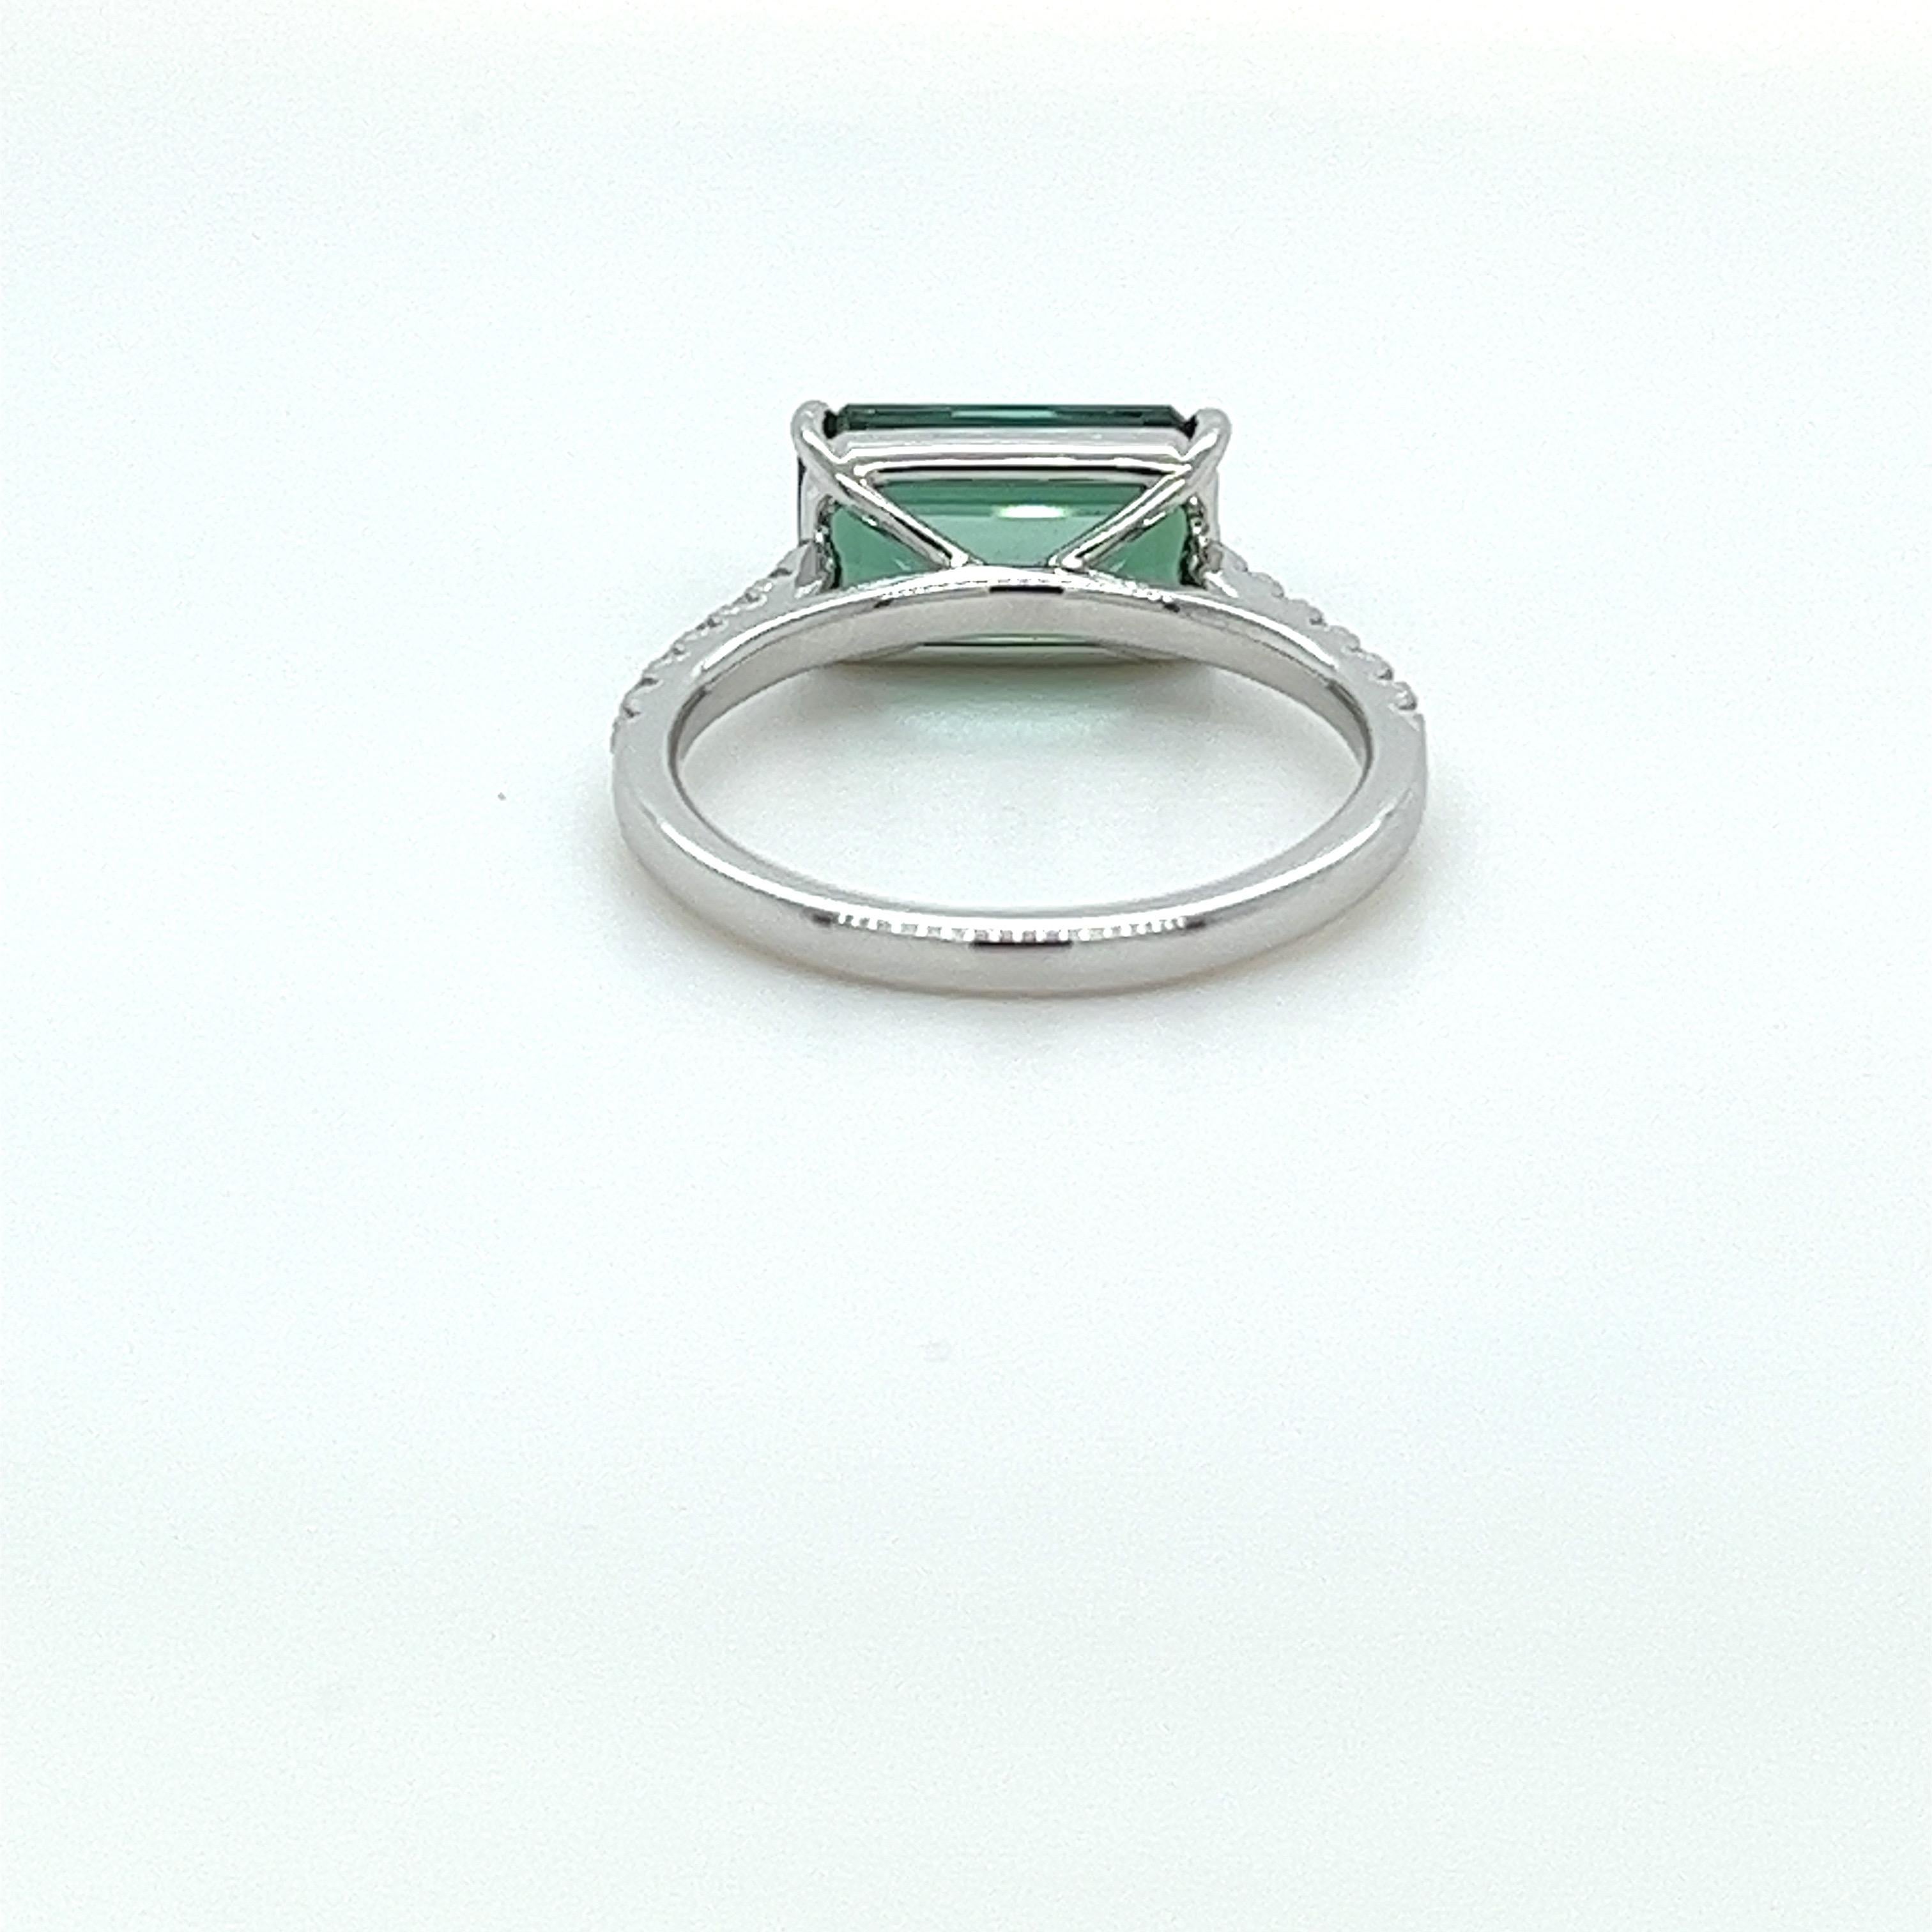 3.68 Carat Emerald Cut Green Tourmaline & Diamond Ring in 18 Karat White Gold In New Condition For Sale In Great Neck, NY